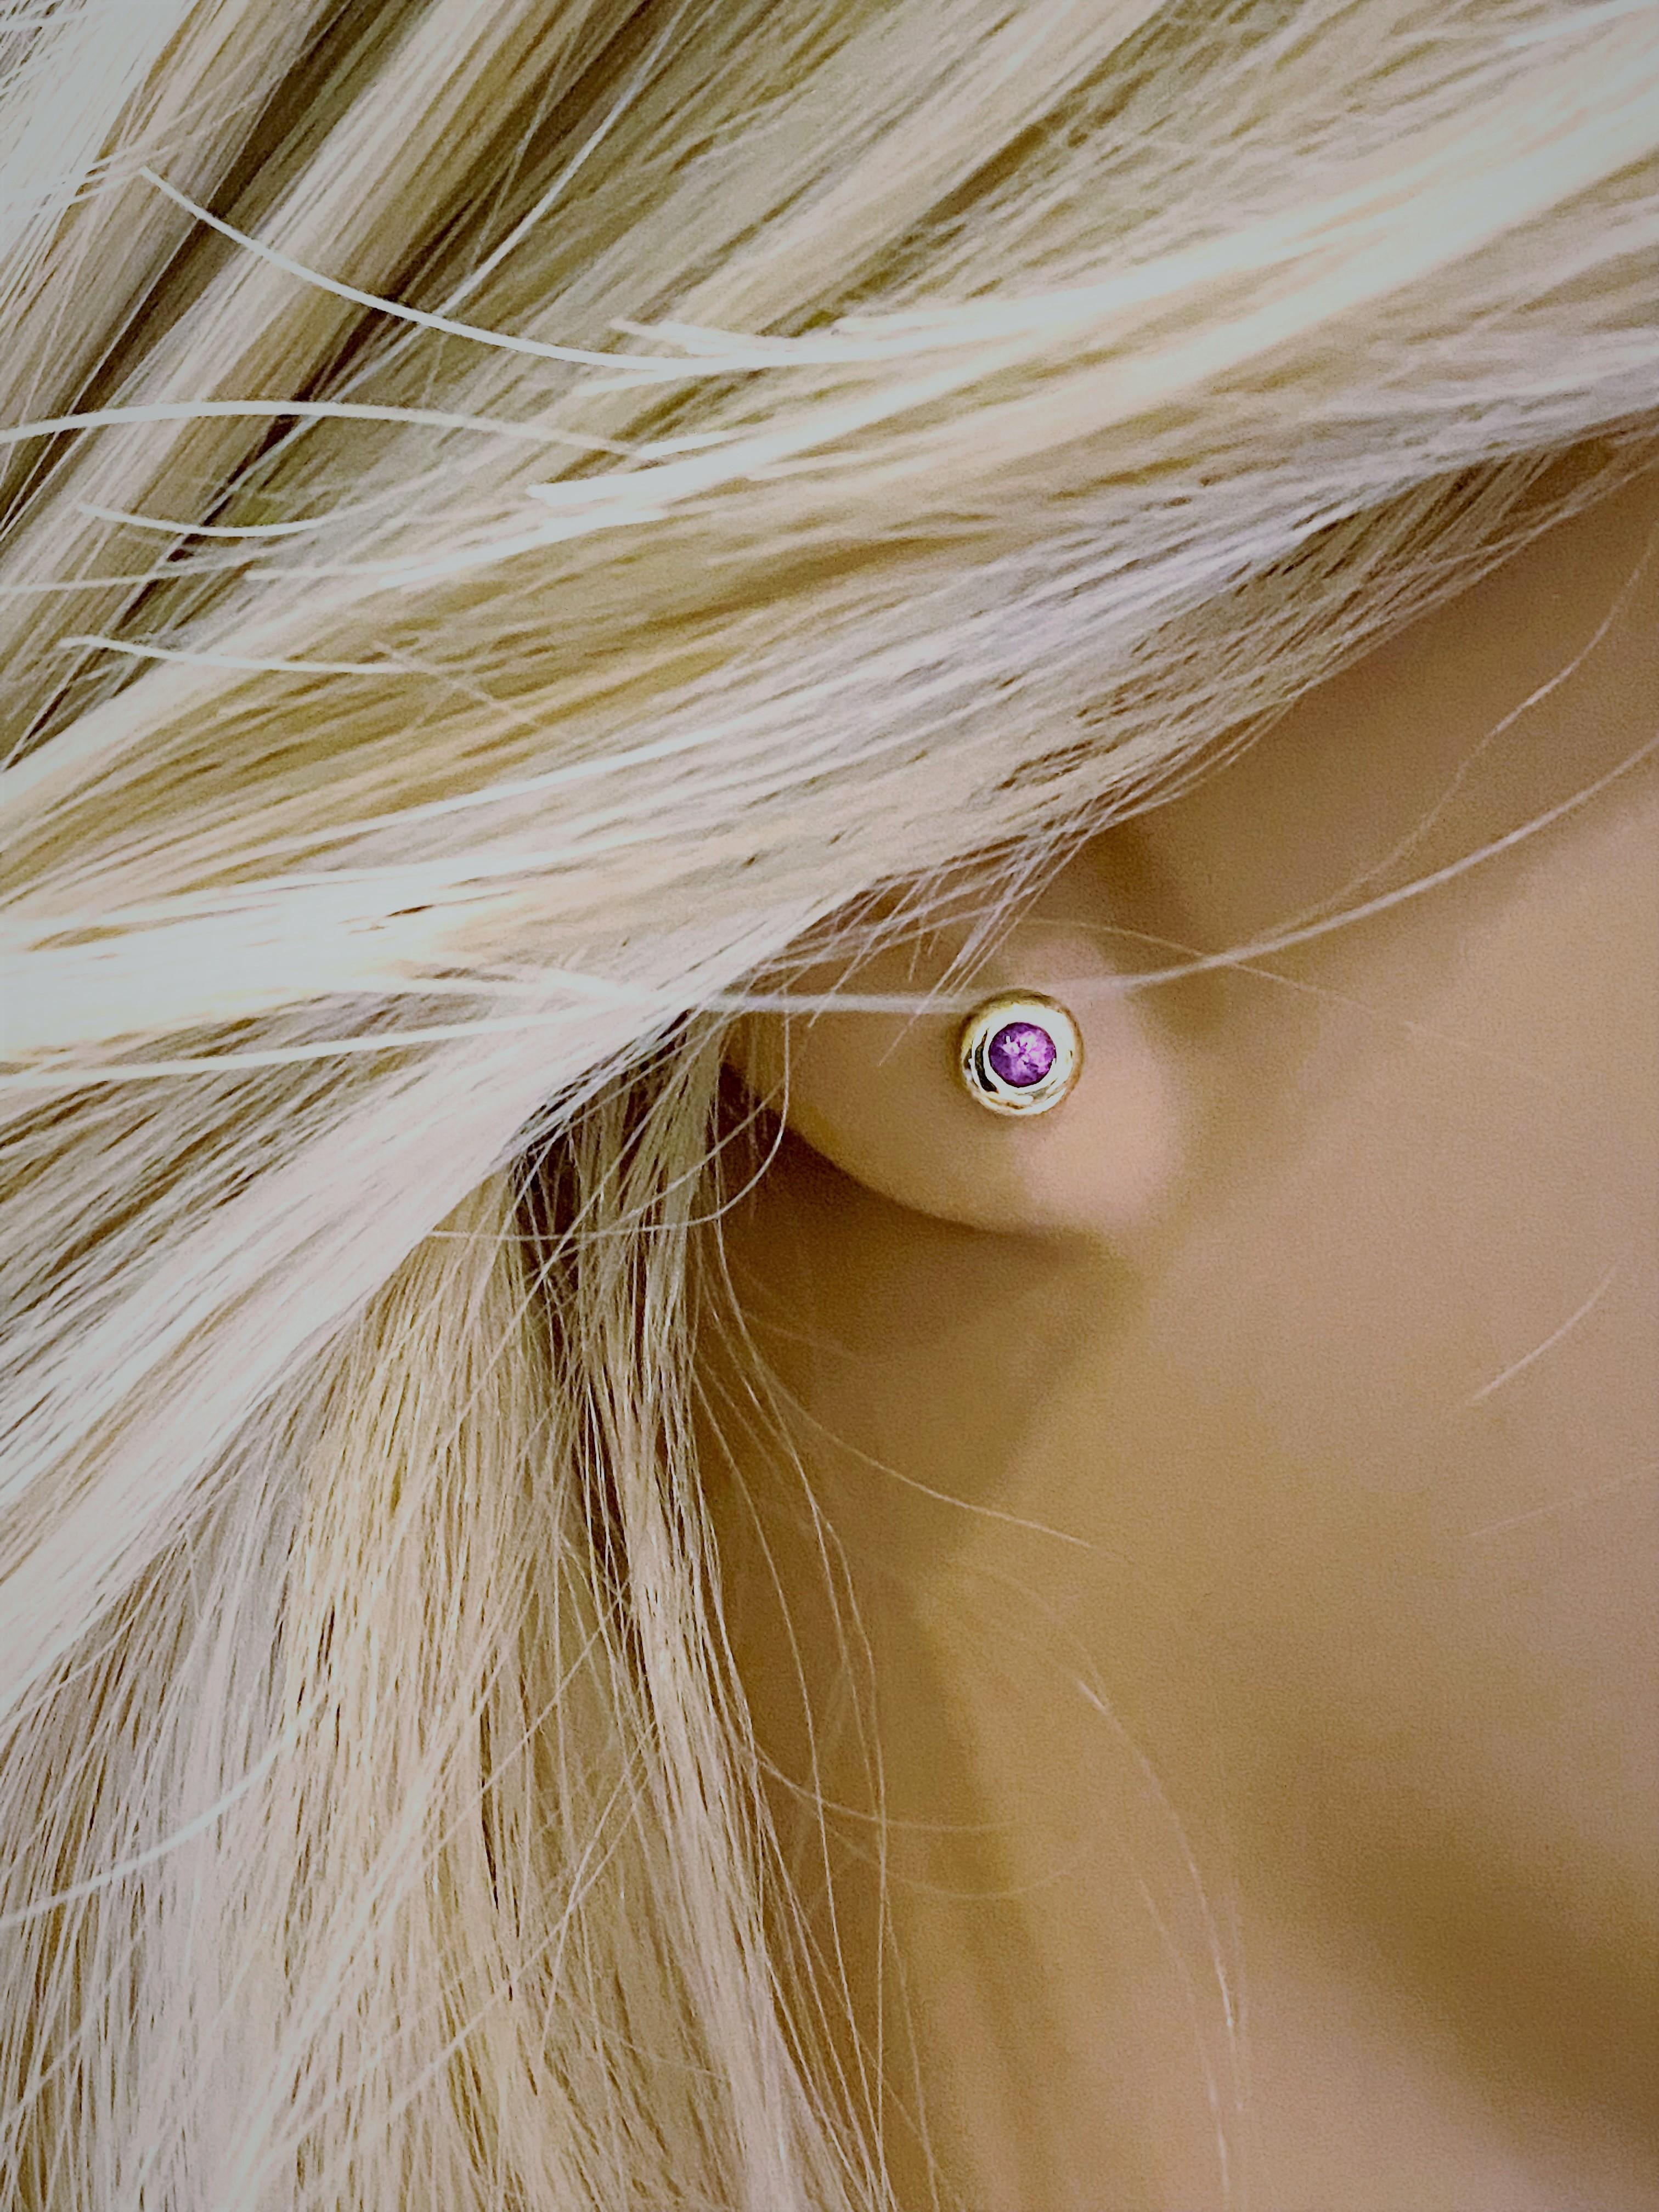 14 karat yellow gold round pink sapphire stud earrings
Two round pink sapphires measuring 3 millimeters each 
Pink sapphire hue tone color is bubblegum pink
Pink sapphires weighing 0.30   
New Earrings
Handmade in the USA
The 14 karat gold earrings